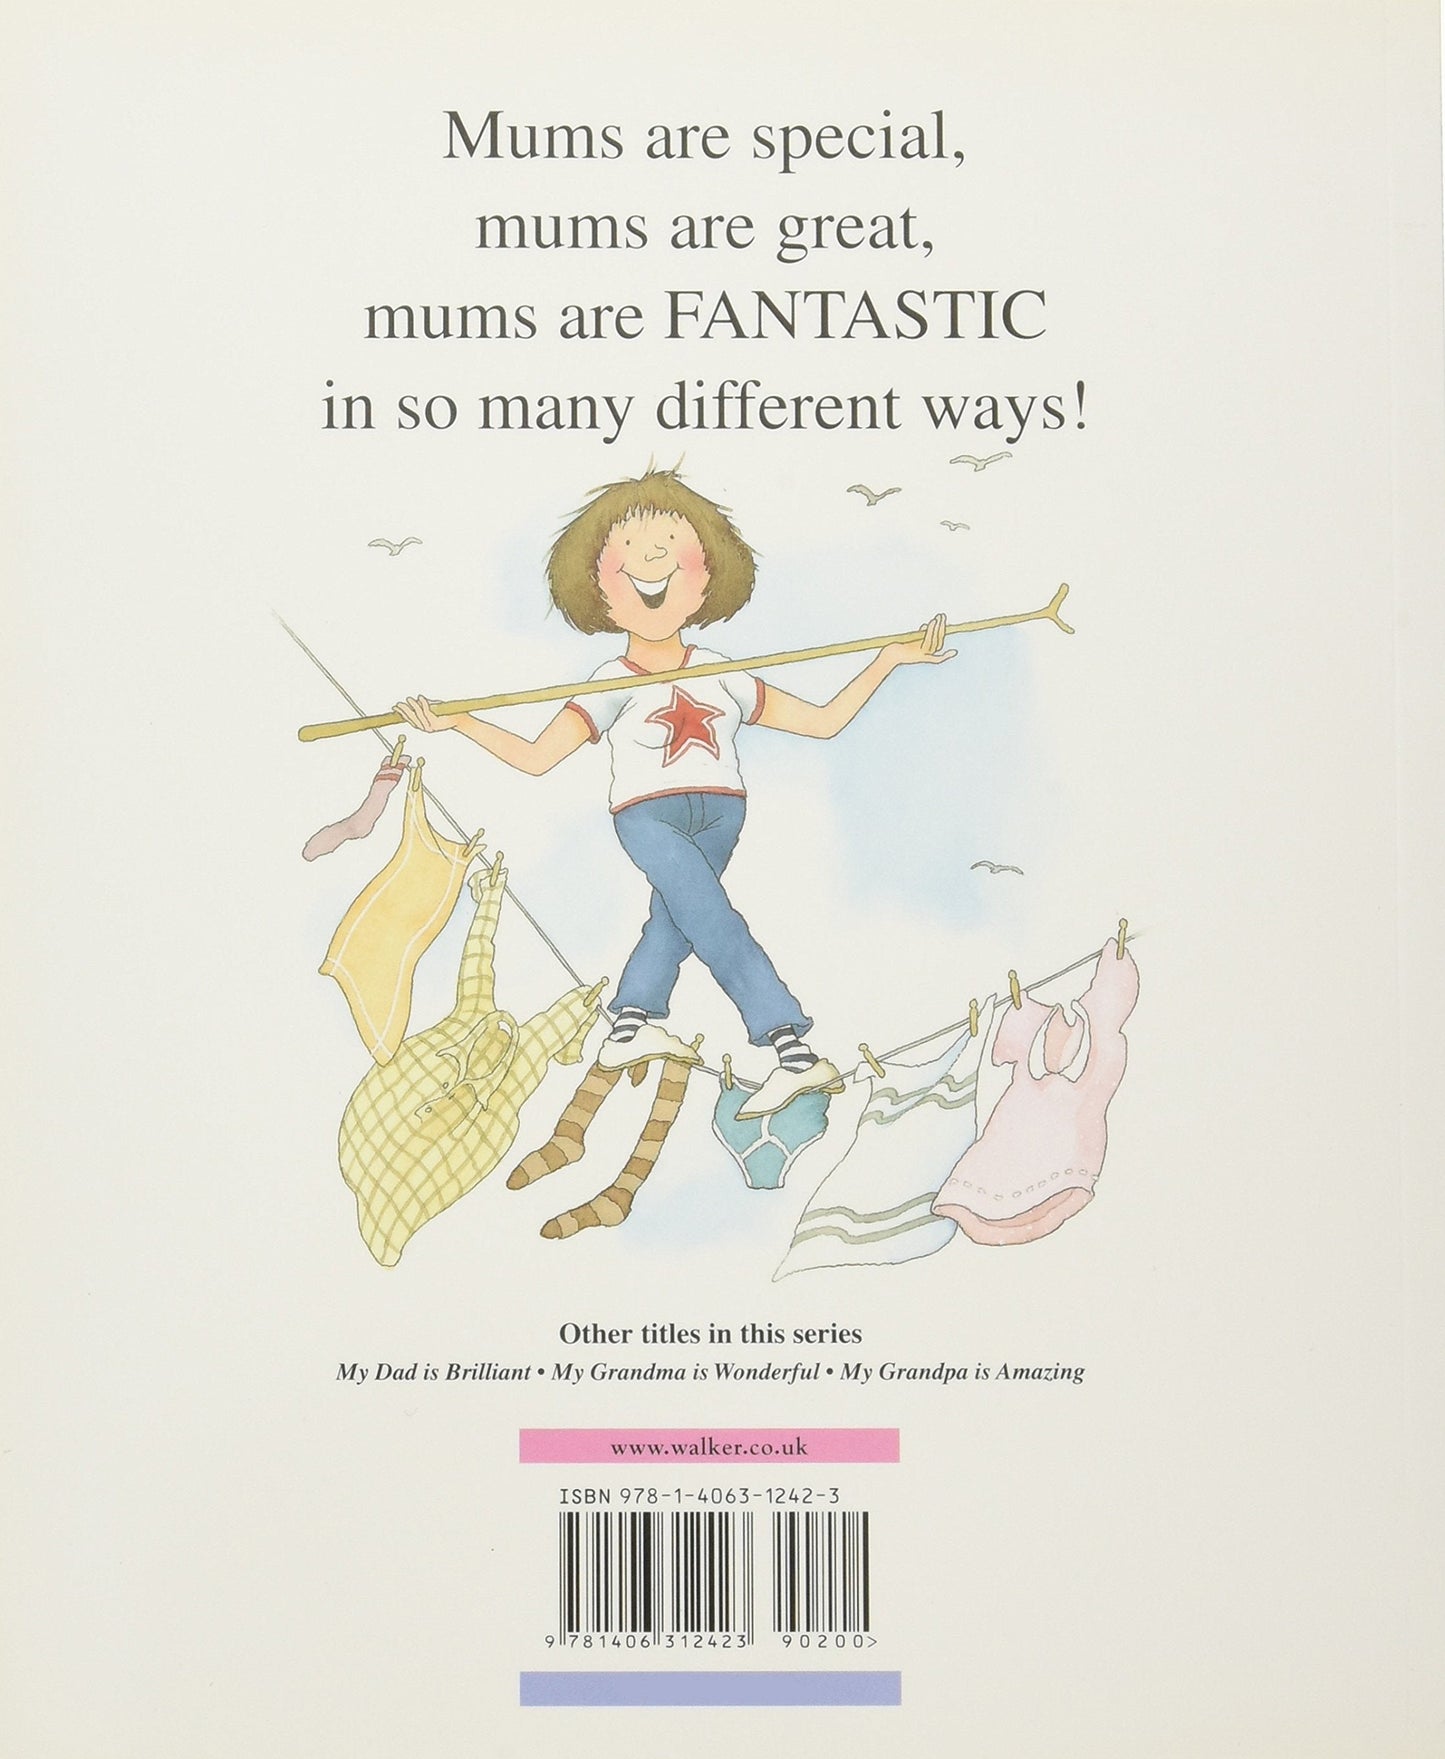 My Mum is Fantastic by Nick Butterworth (Softcover)